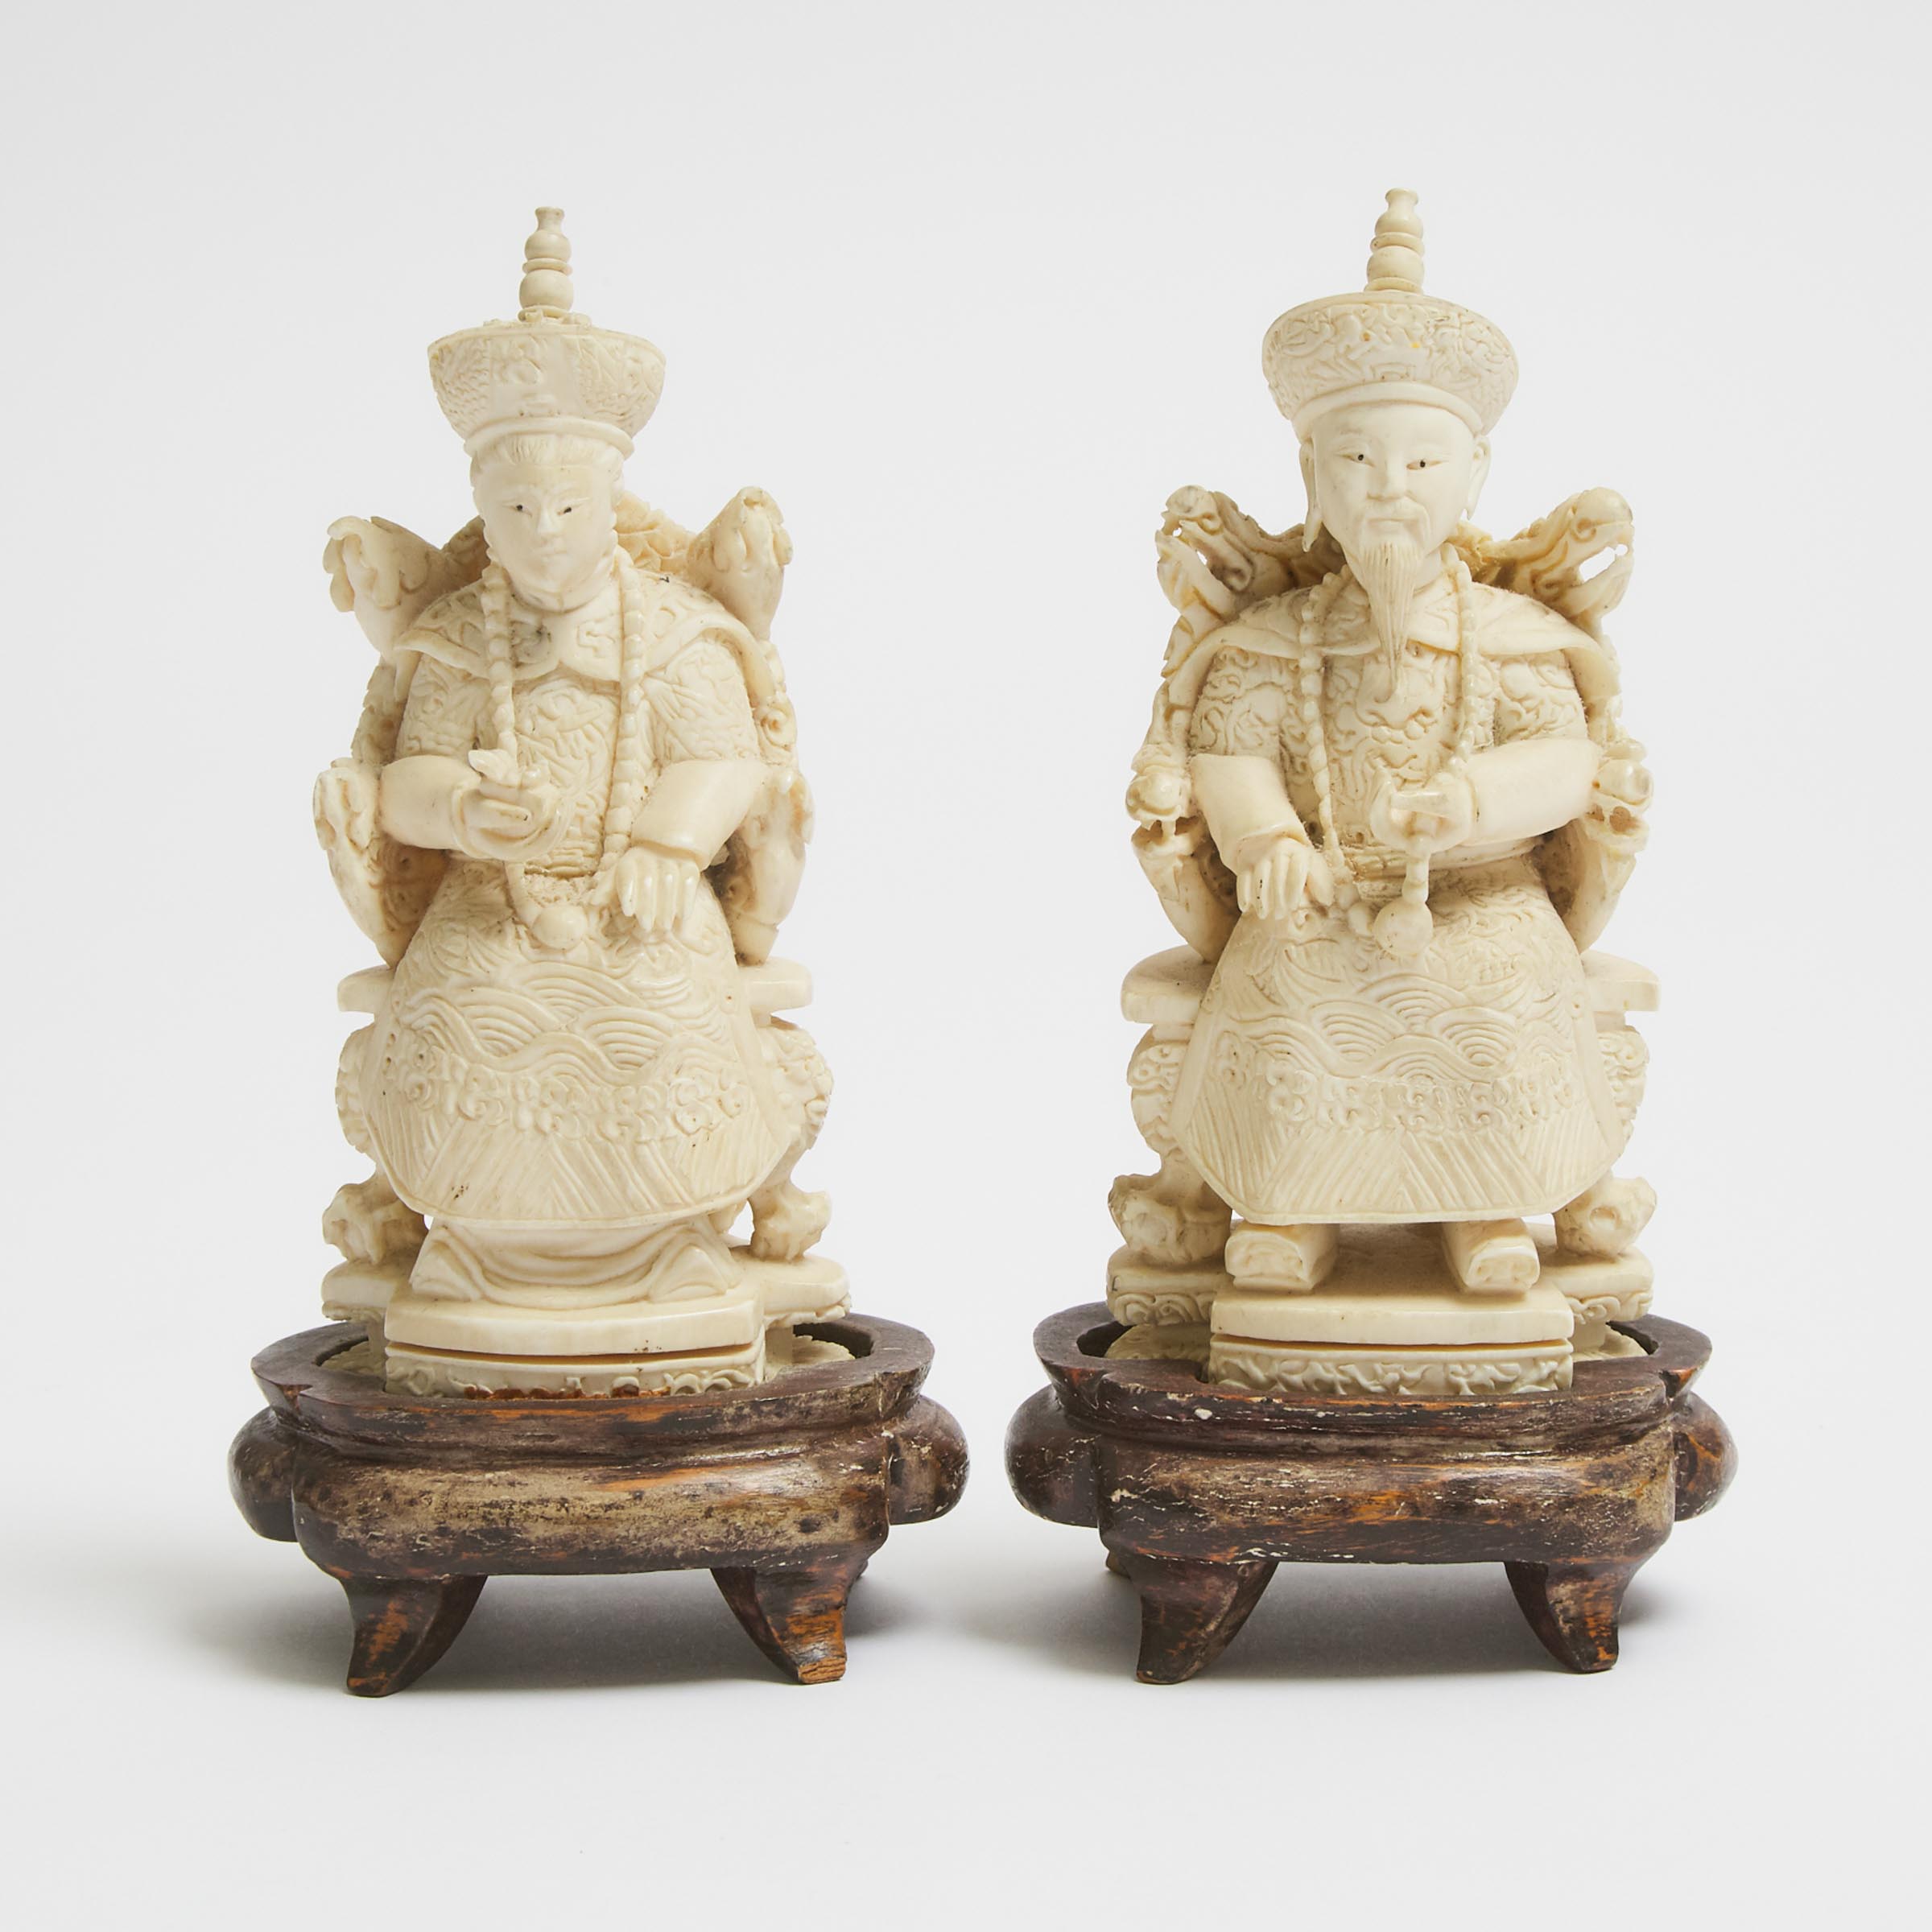 An Ivory Carved Emperor and Empress Pair, Early 20th Century